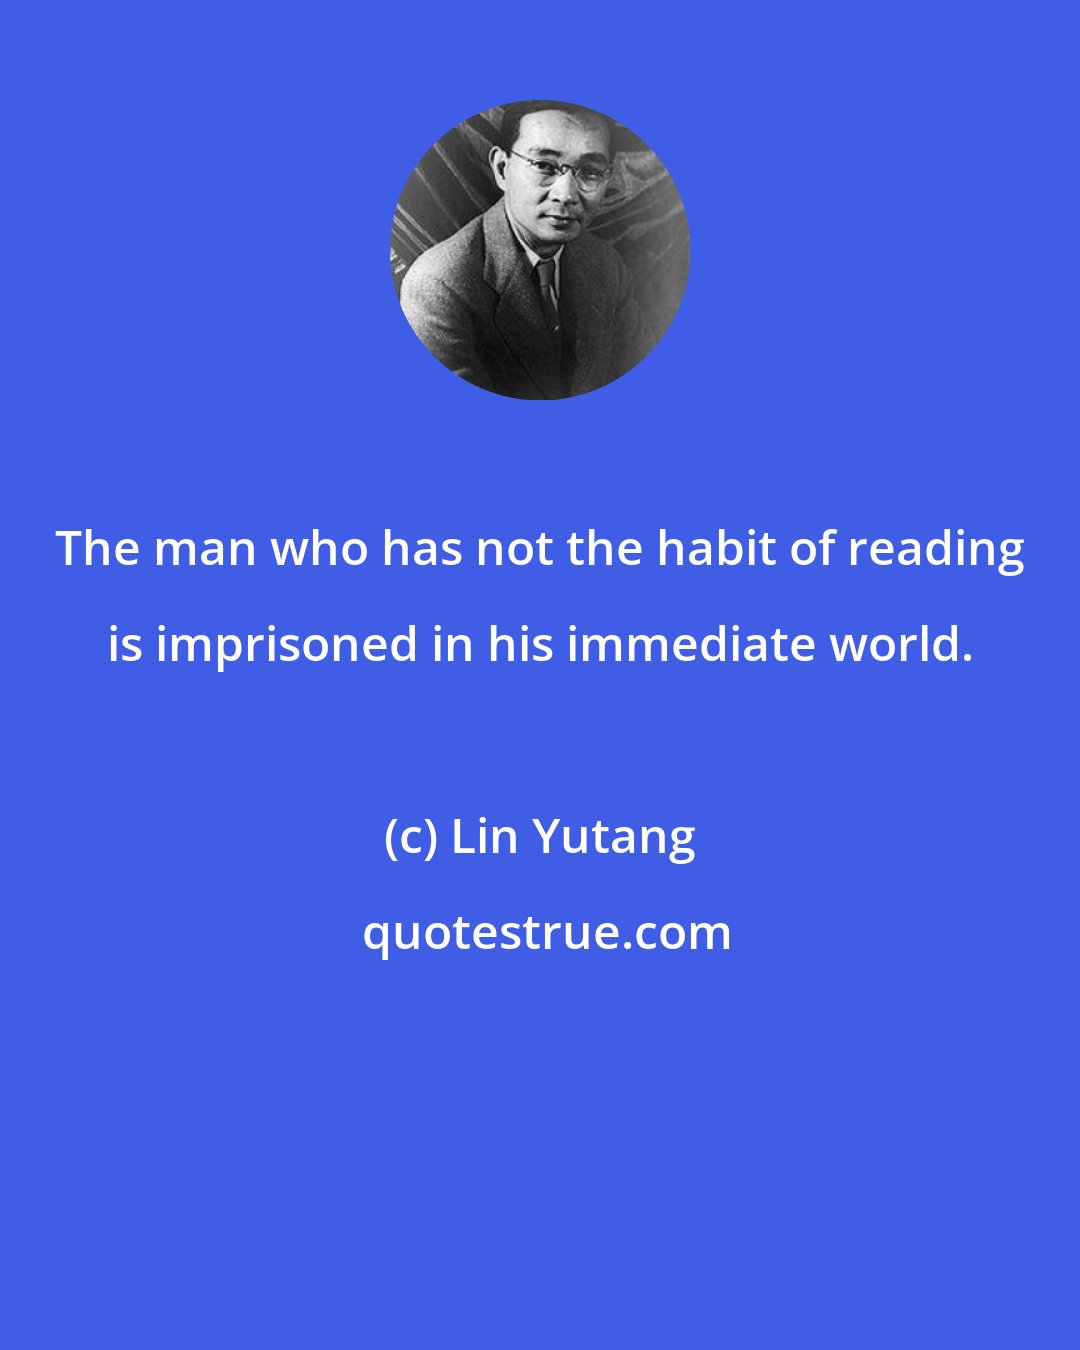 Lin Yutang: The man who has not the habit of reading is imprisoned in his immediate world.